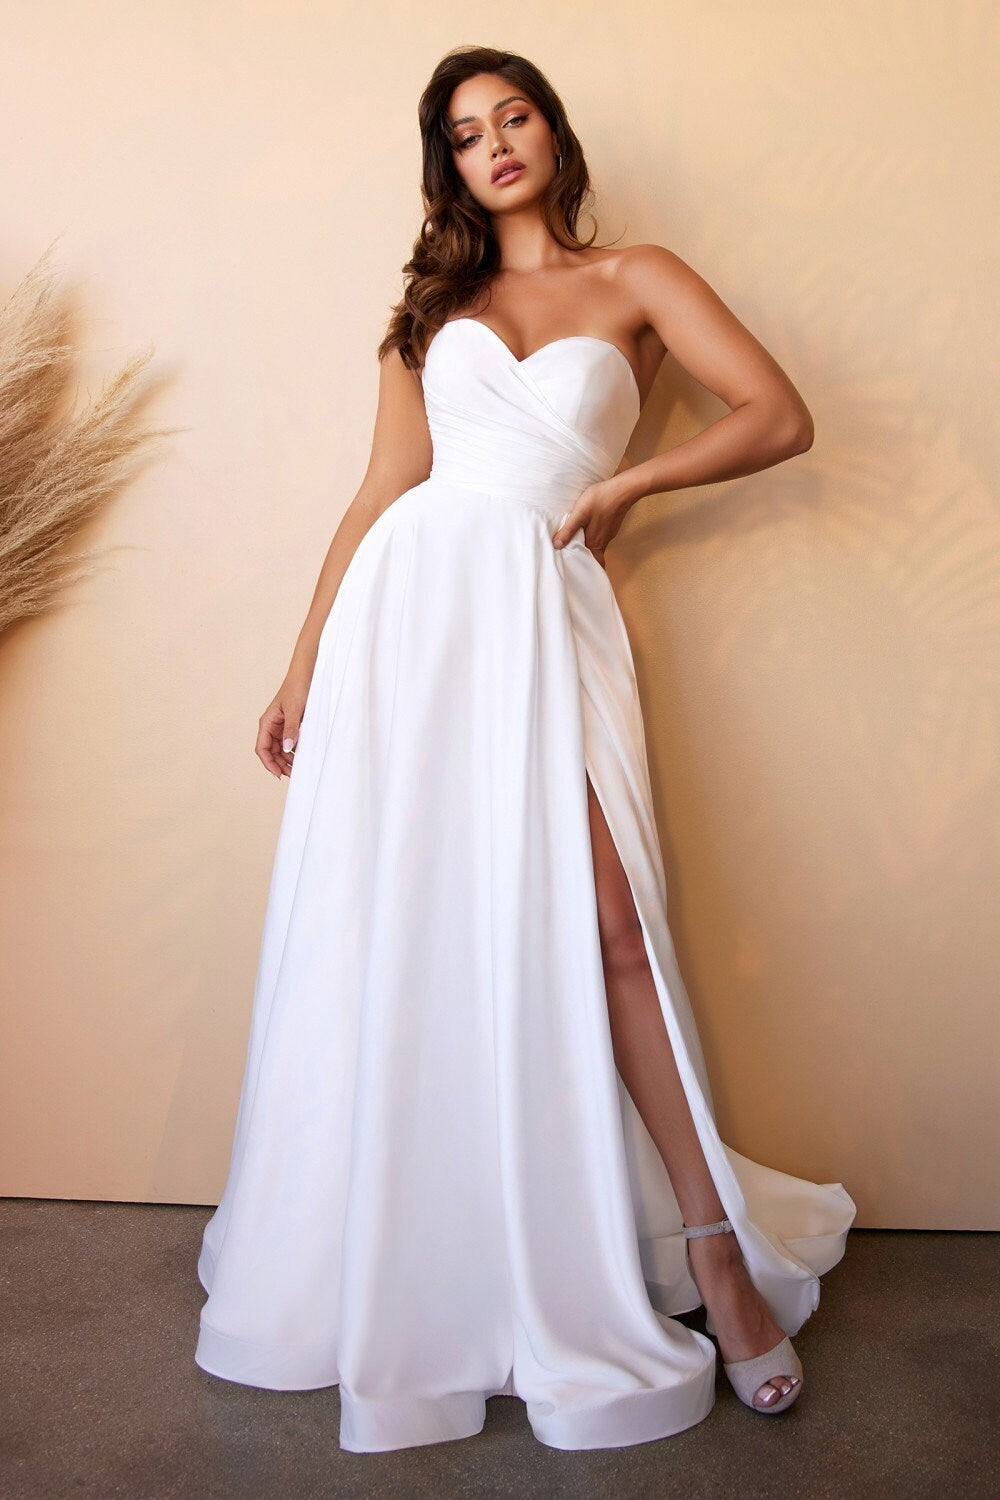 Simple Sweetheart Neckline Sleeveless Strapless with Side Slit Satin Wedding Dress Bridal Gown Simple Minimalist Open Back Bare Shoulders